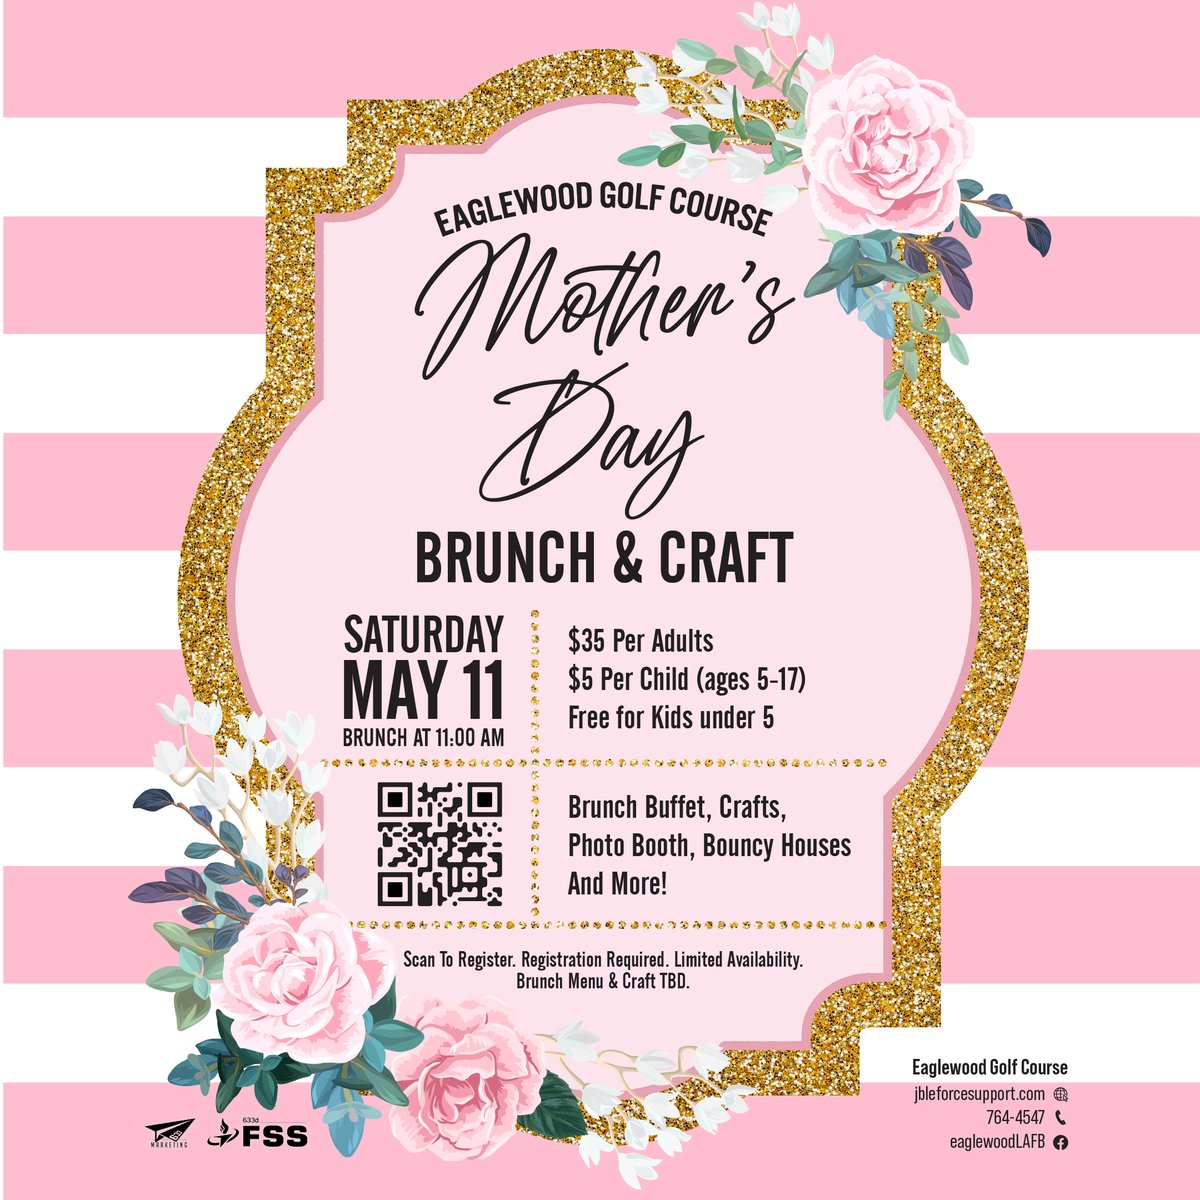 Celebrate Mother's Day with us at brunch! 🌸🍳 Please note the time change to only availability at the 1100 seating. This way you can maximize the memories and quality time together. See you there! #MothersDayBrunch #TimeChange